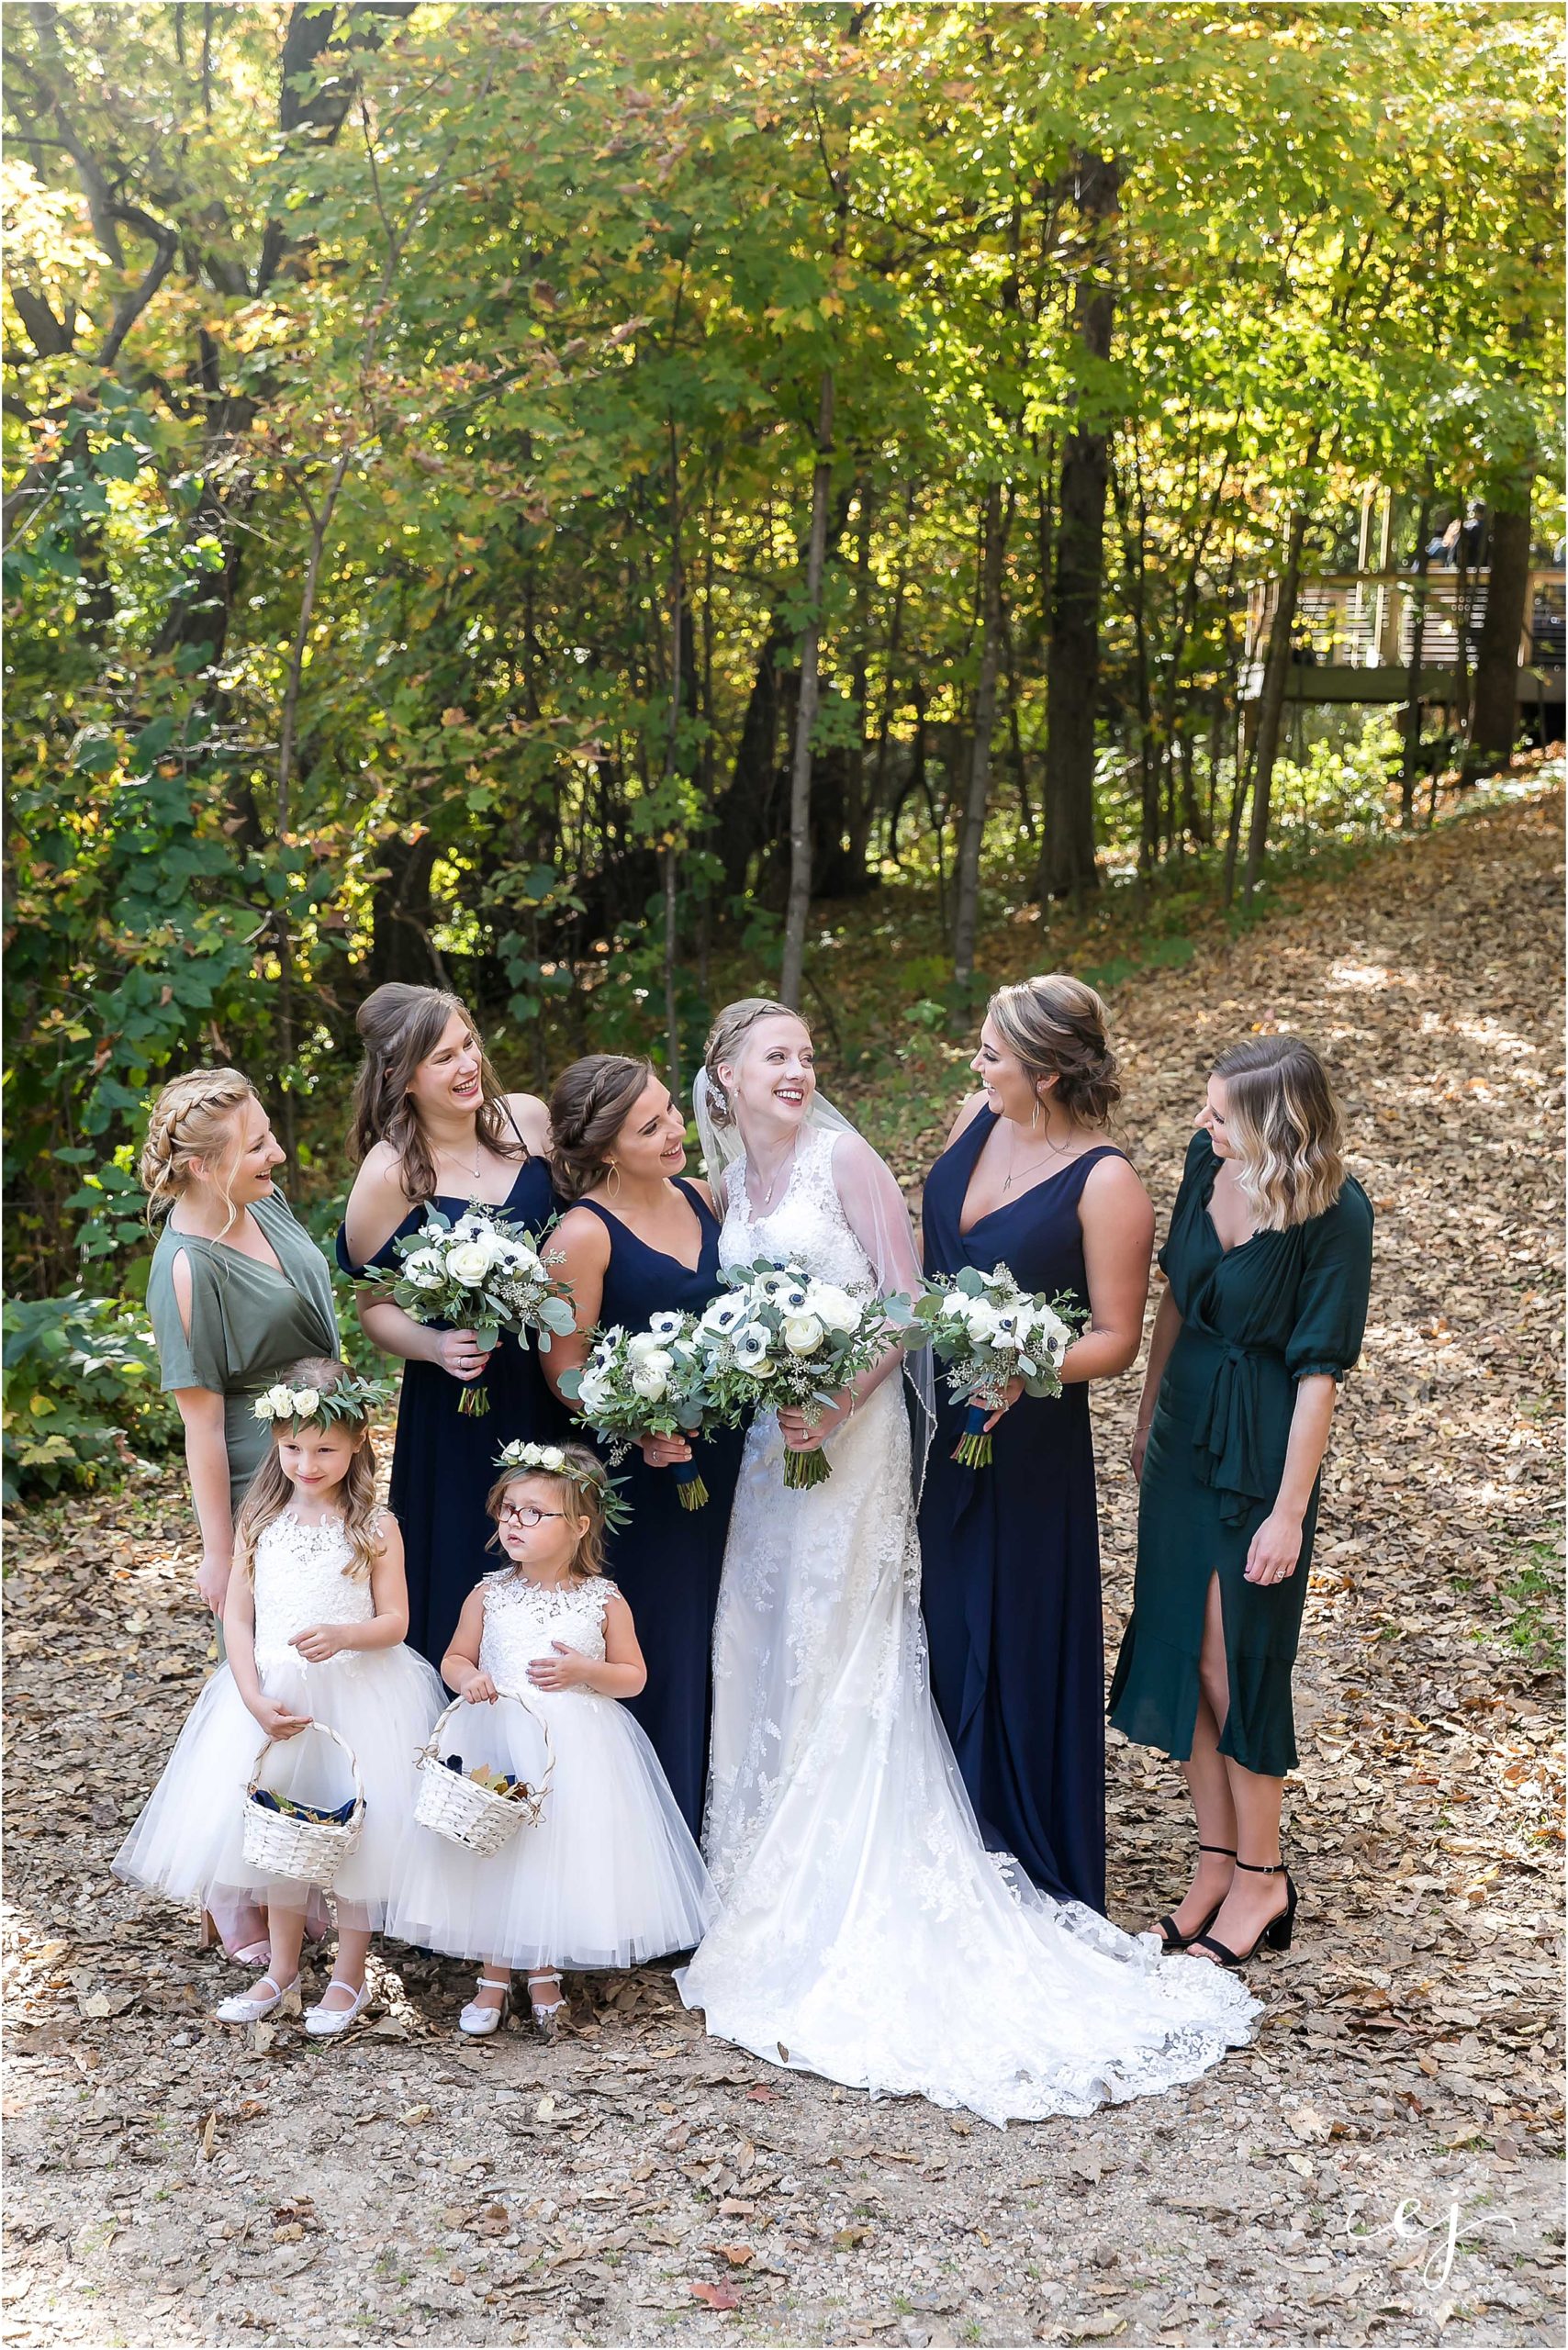 Bridesmaids bride and personal attendance flower girls navy and emerald outside at Edgewood farm wedding